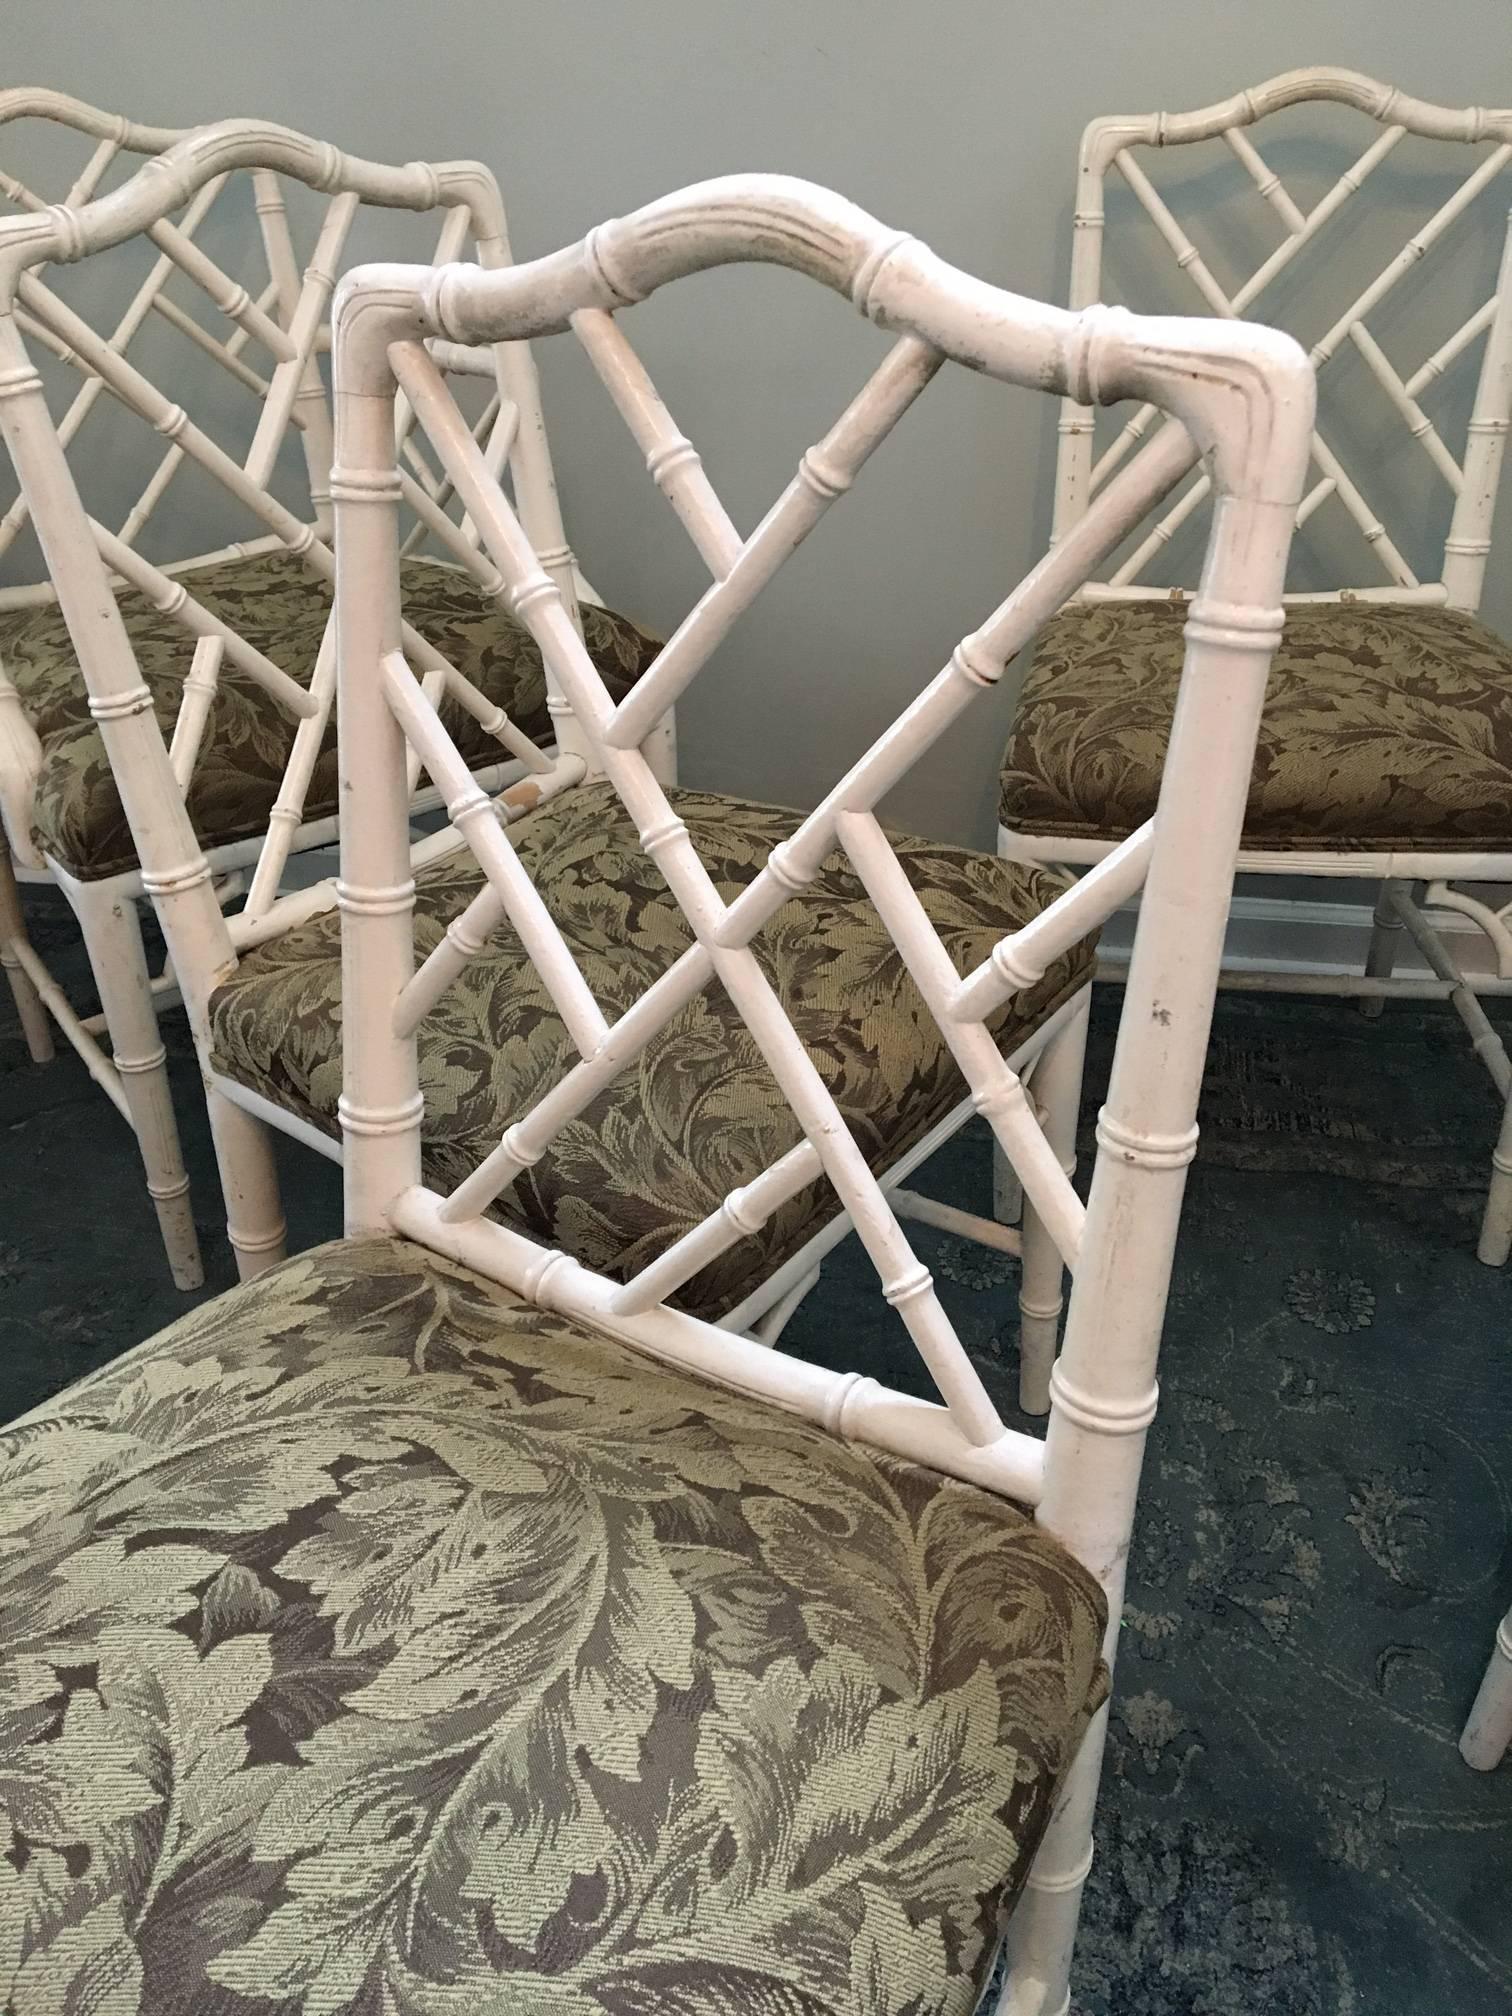 Set of six faux bamboo dining chairs in the iconic Asian Chippendale style. Four side chairs and two-arm chairs. Upholstered seats in excellent condition. Chairs are in good vintage condition with abrasions to finish.
As always, all reasonable